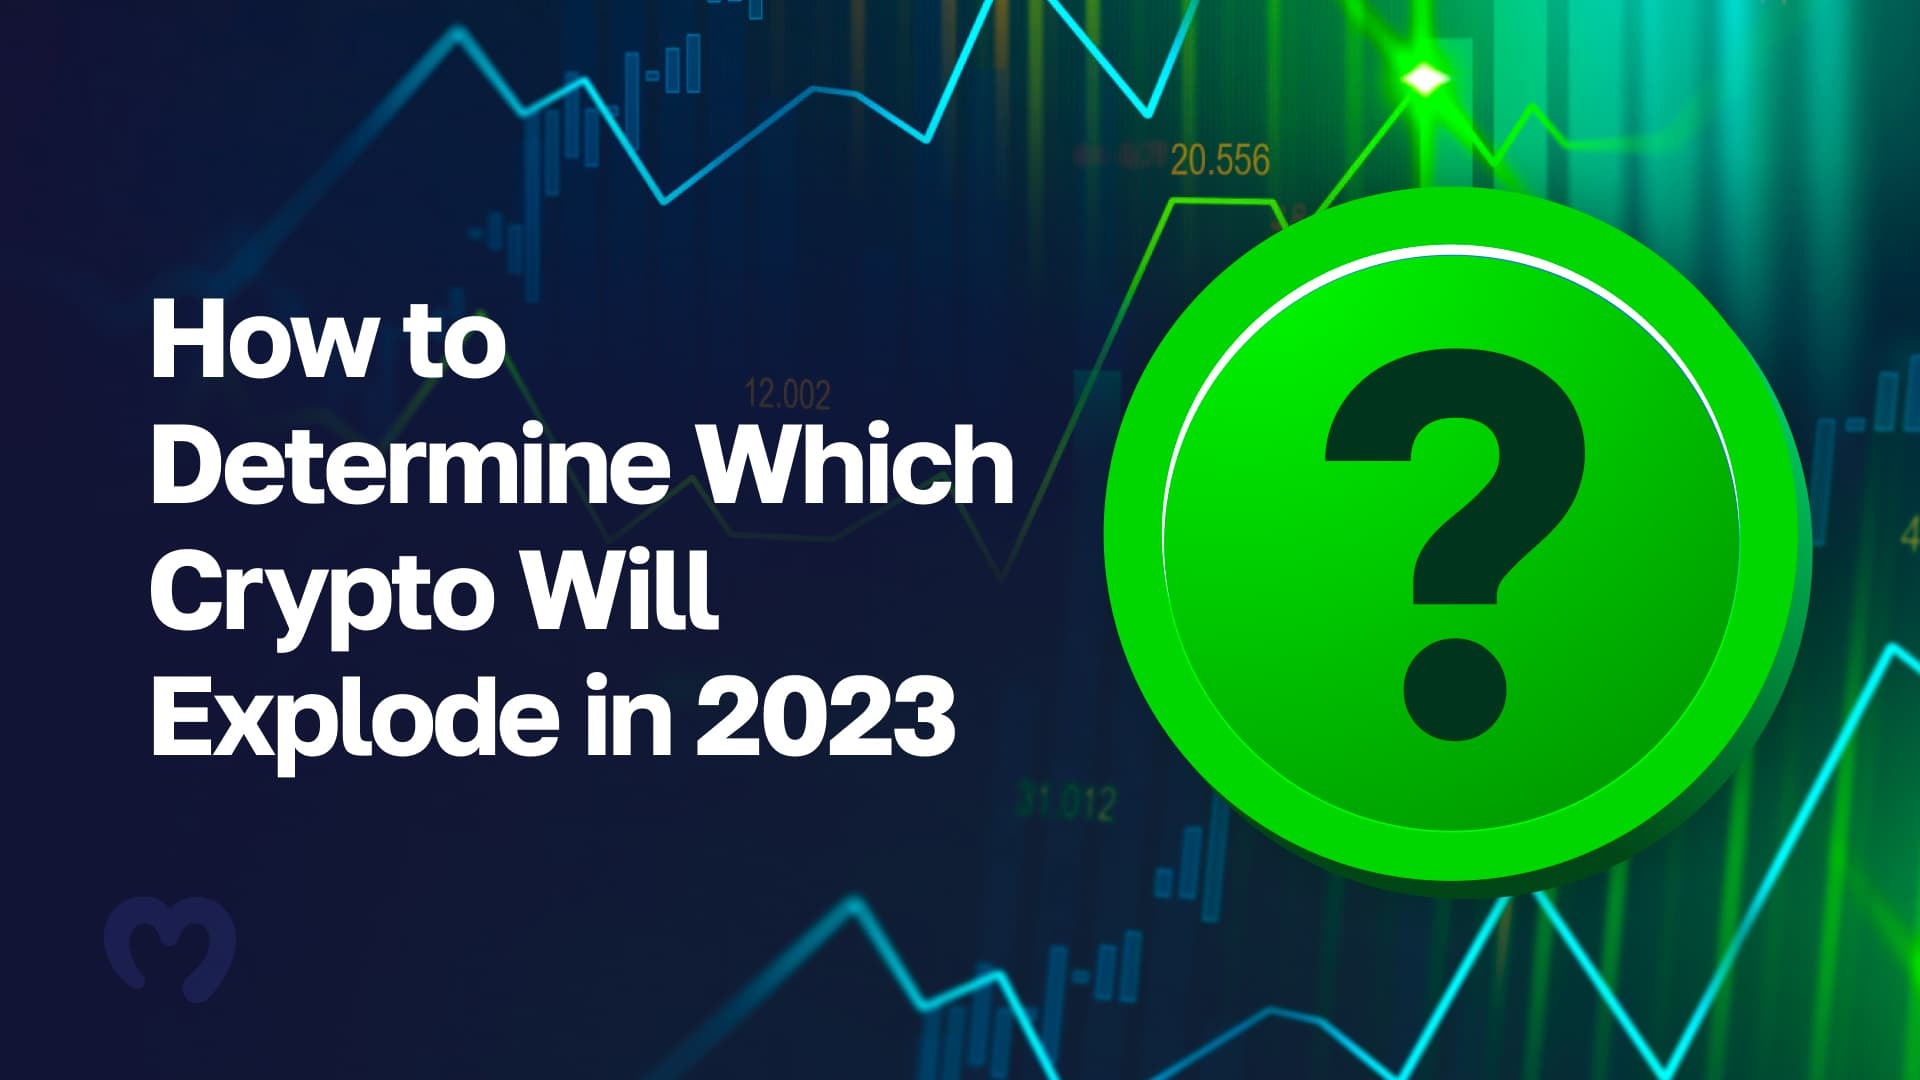 How to Determine Which Crypto Will Explode in 2023